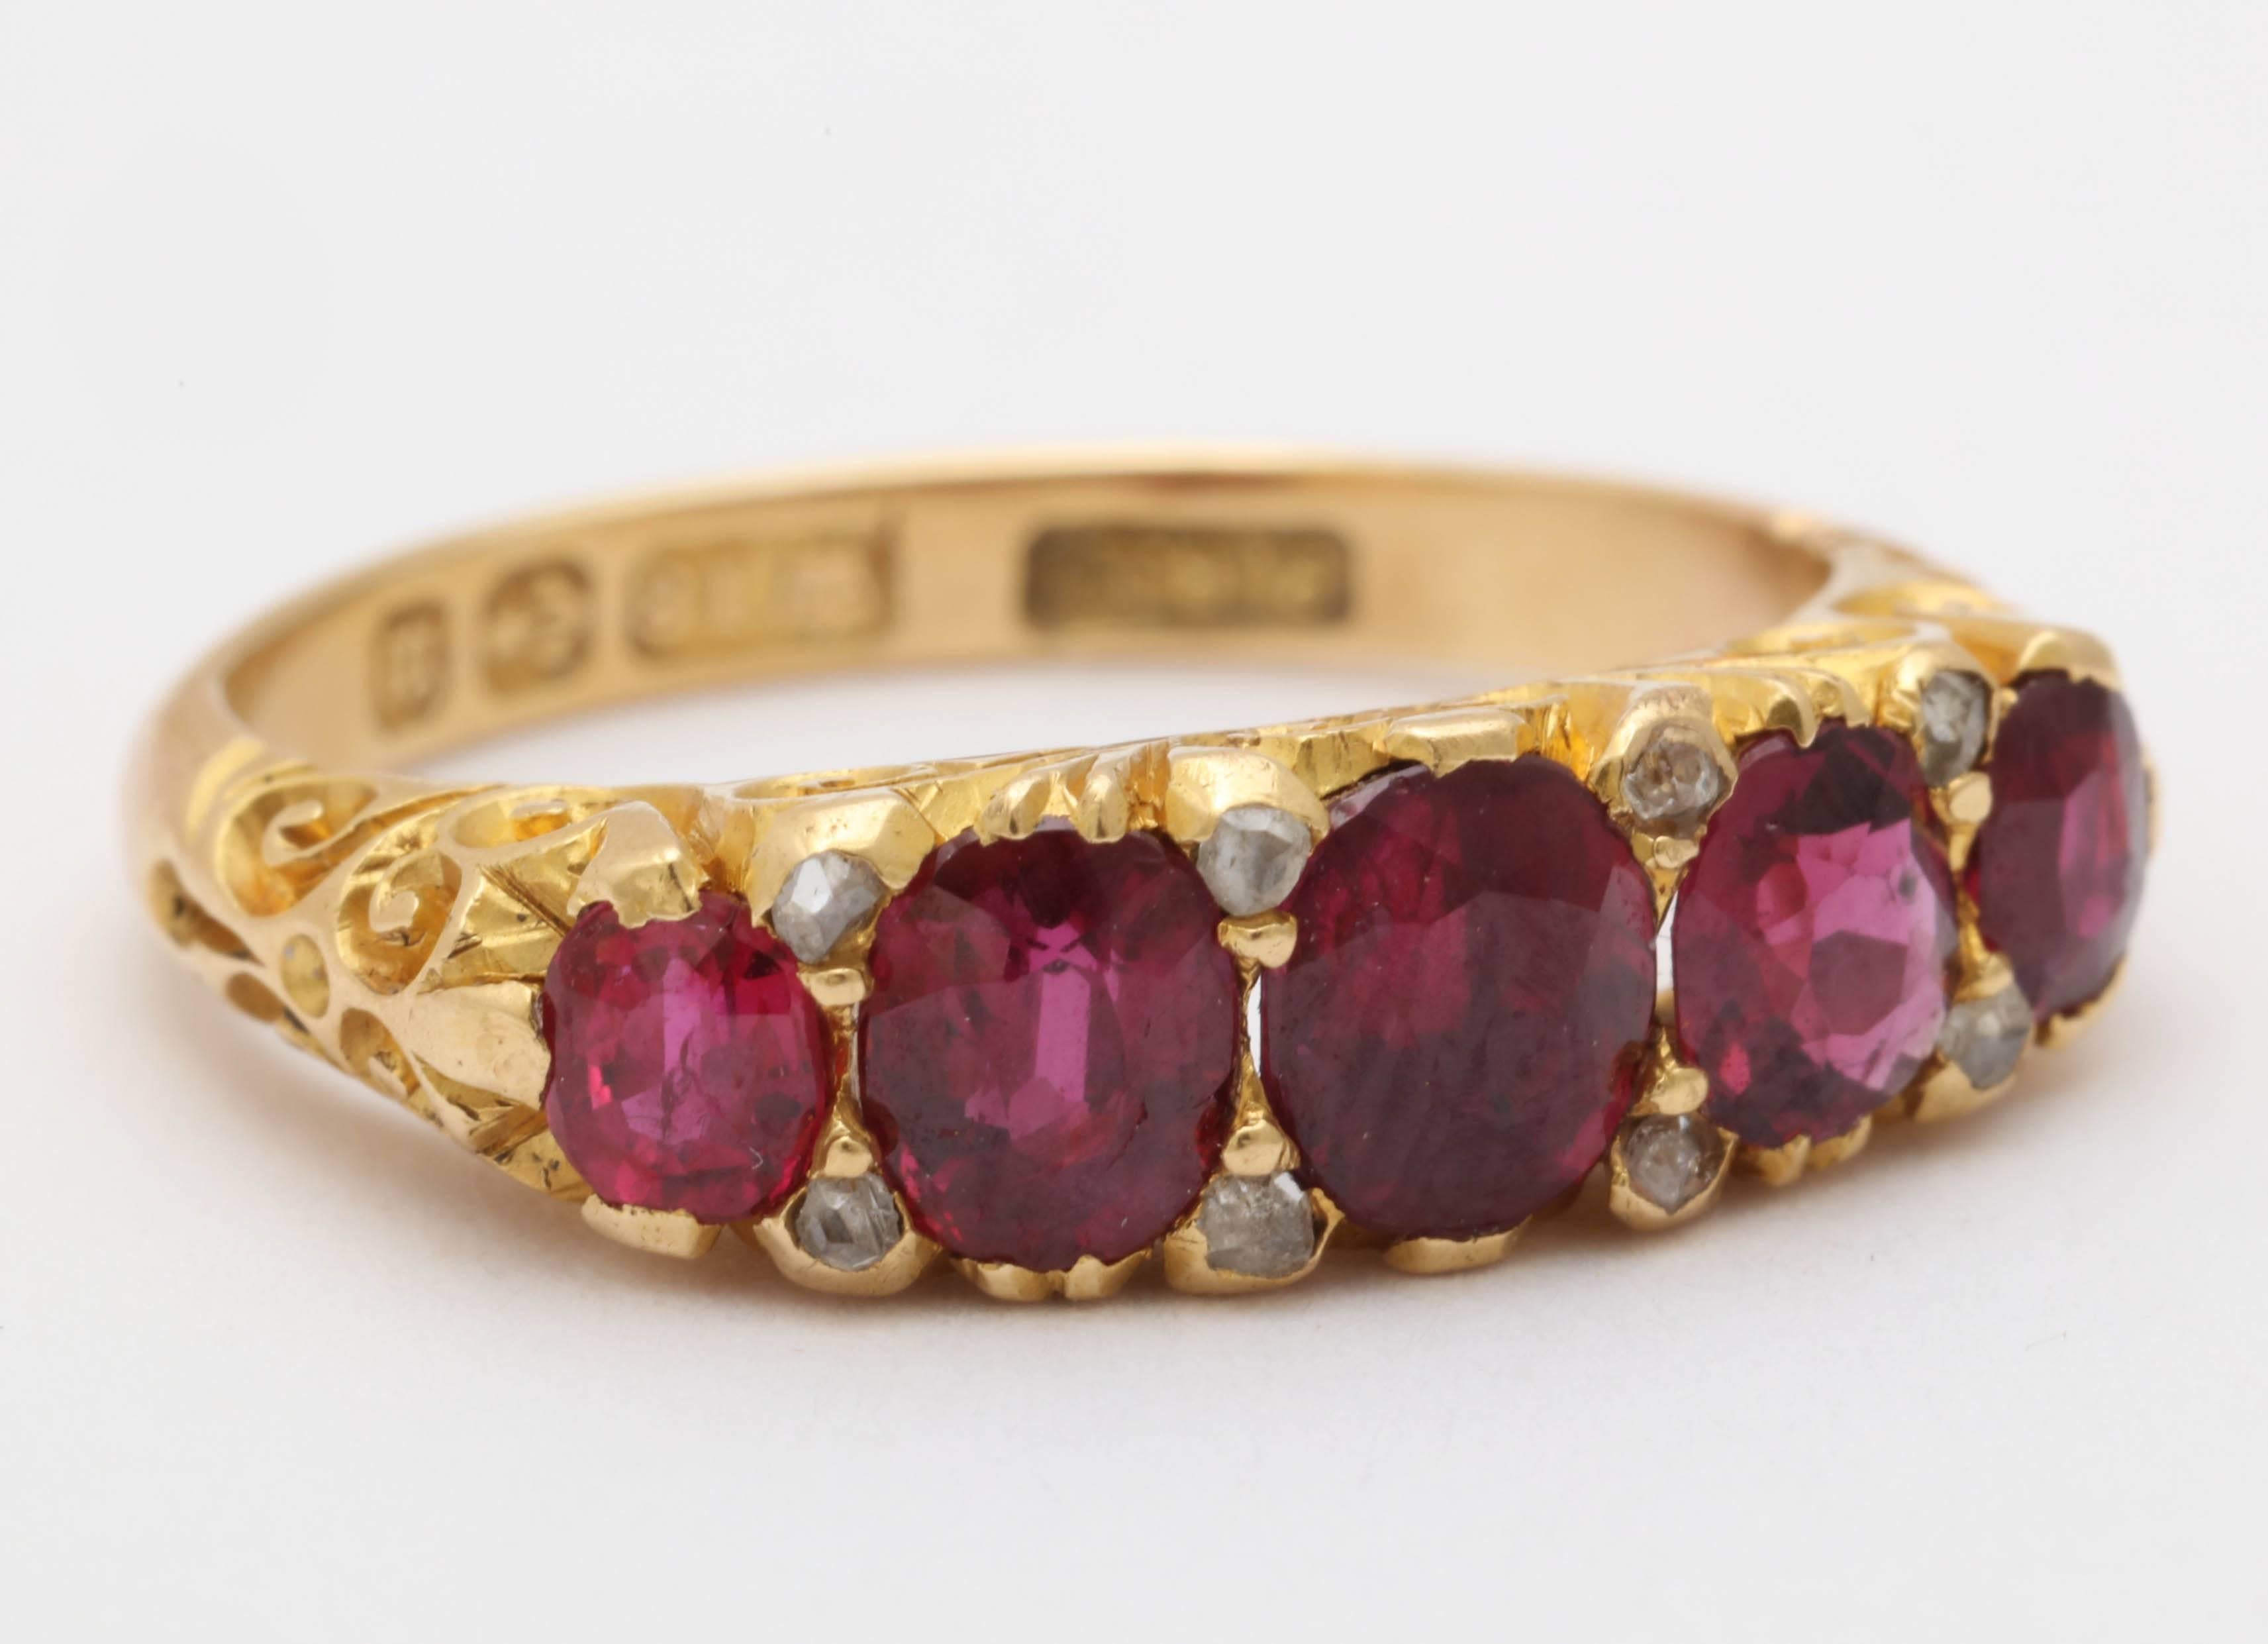 Victorian gold ring with 5 graduated faceted oval rubies and 8 small old cut diamonds, featuring scroll work on the gallery and continuing onto shoulders. 
Hallmark indicates 18K gold and an origin of Birmingham, England c.1886-1887.